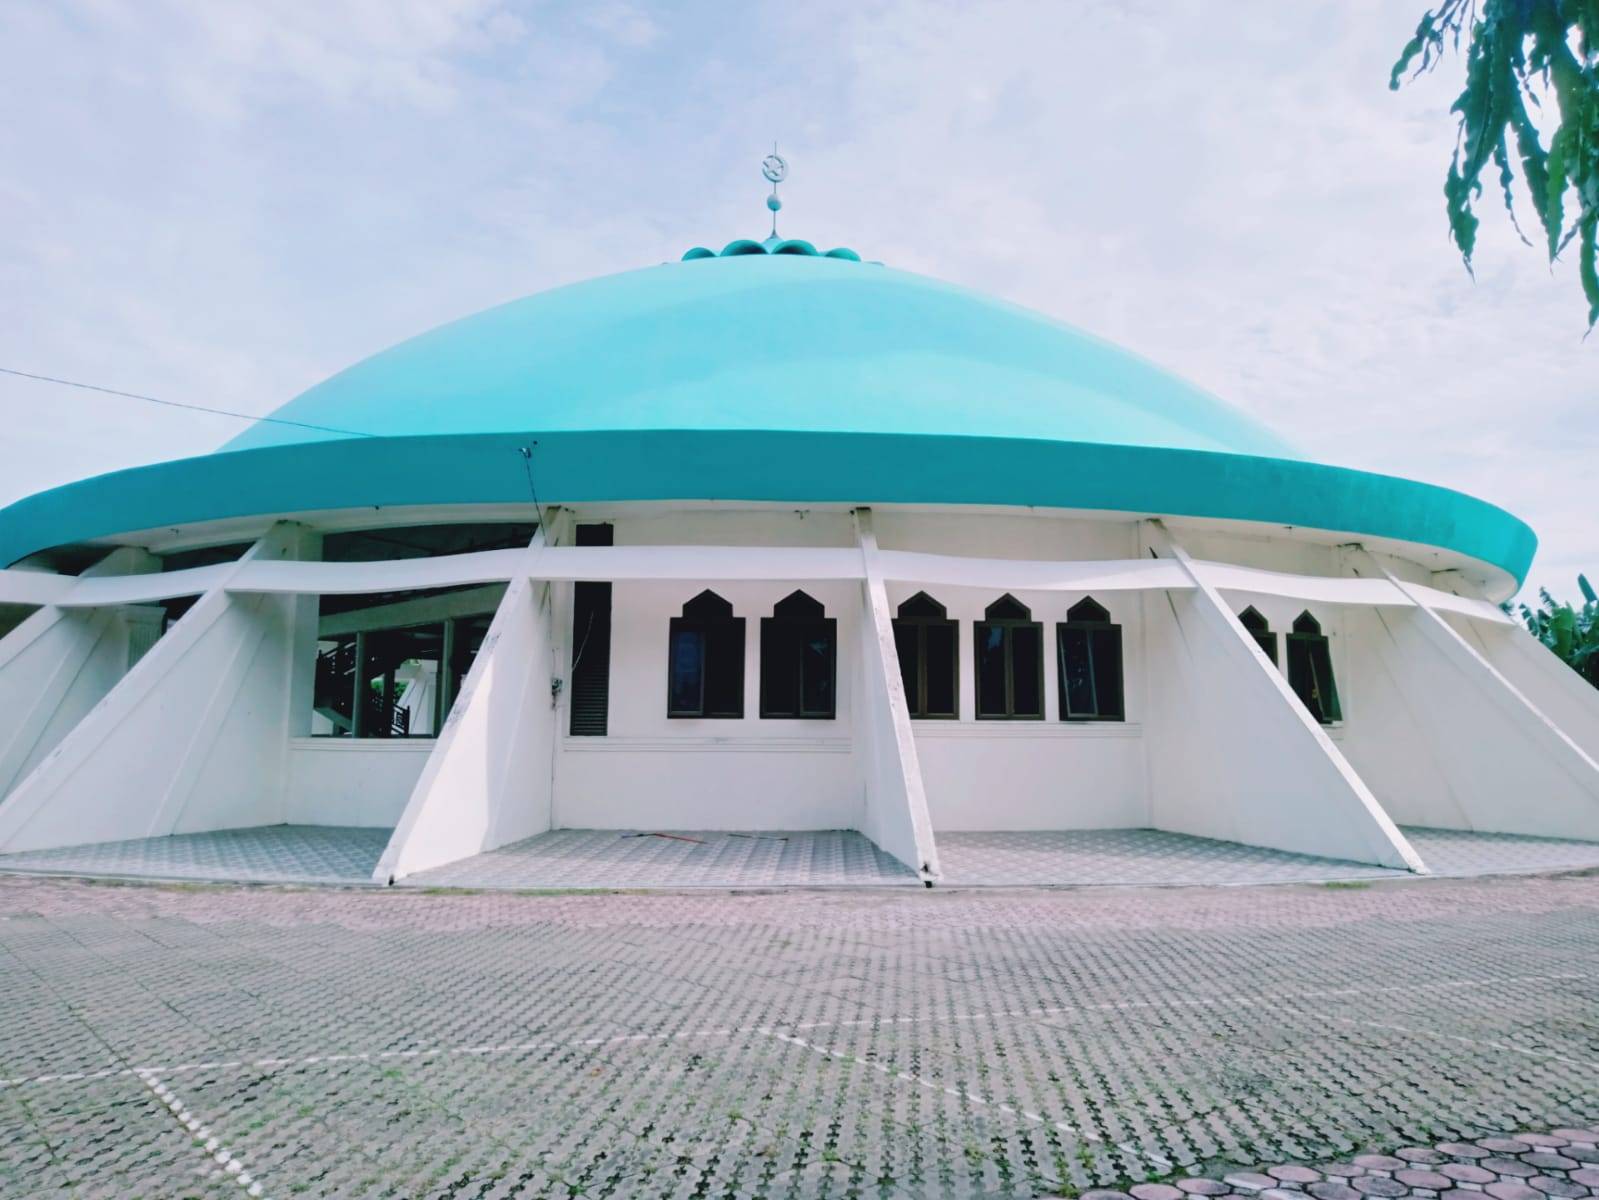 Visiting Umbrella-like Mosques and Prosperous Eating Places. Aceh Besar. Indonesia.